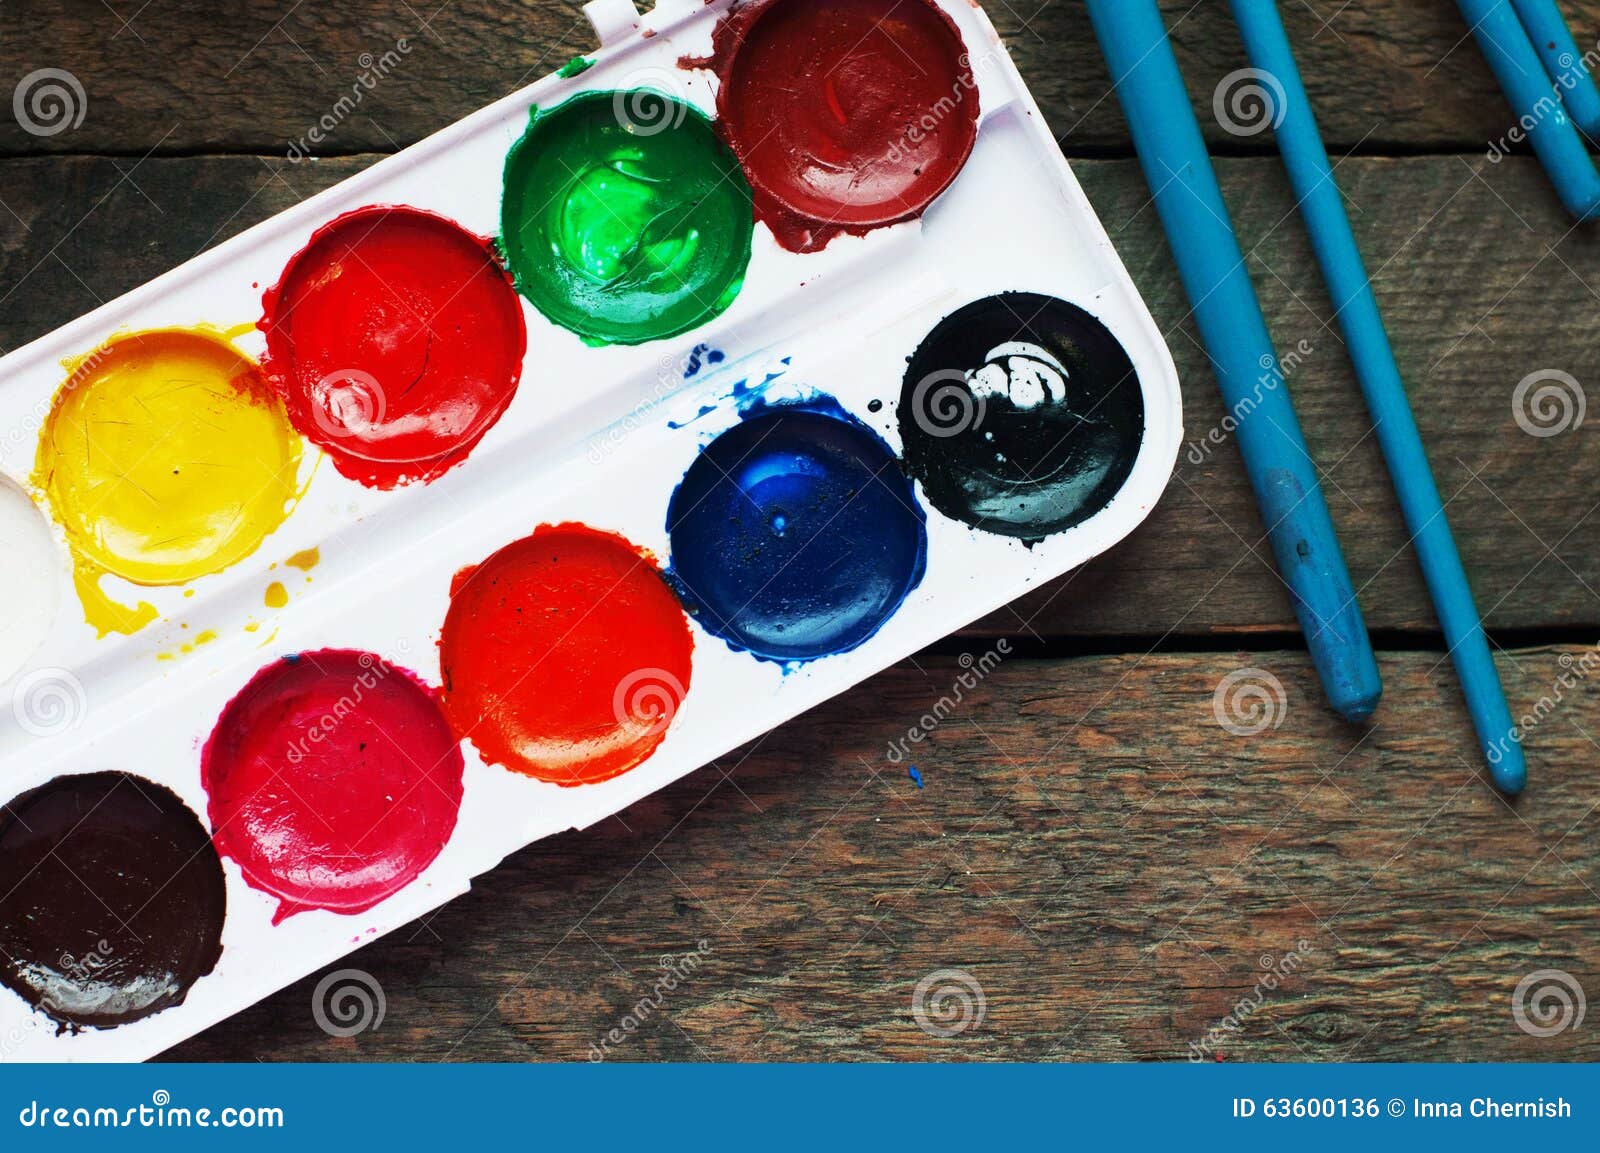 art of painting. paint buckets on wood background. different paint colors painting on wooden background. painting set: brushes, pa